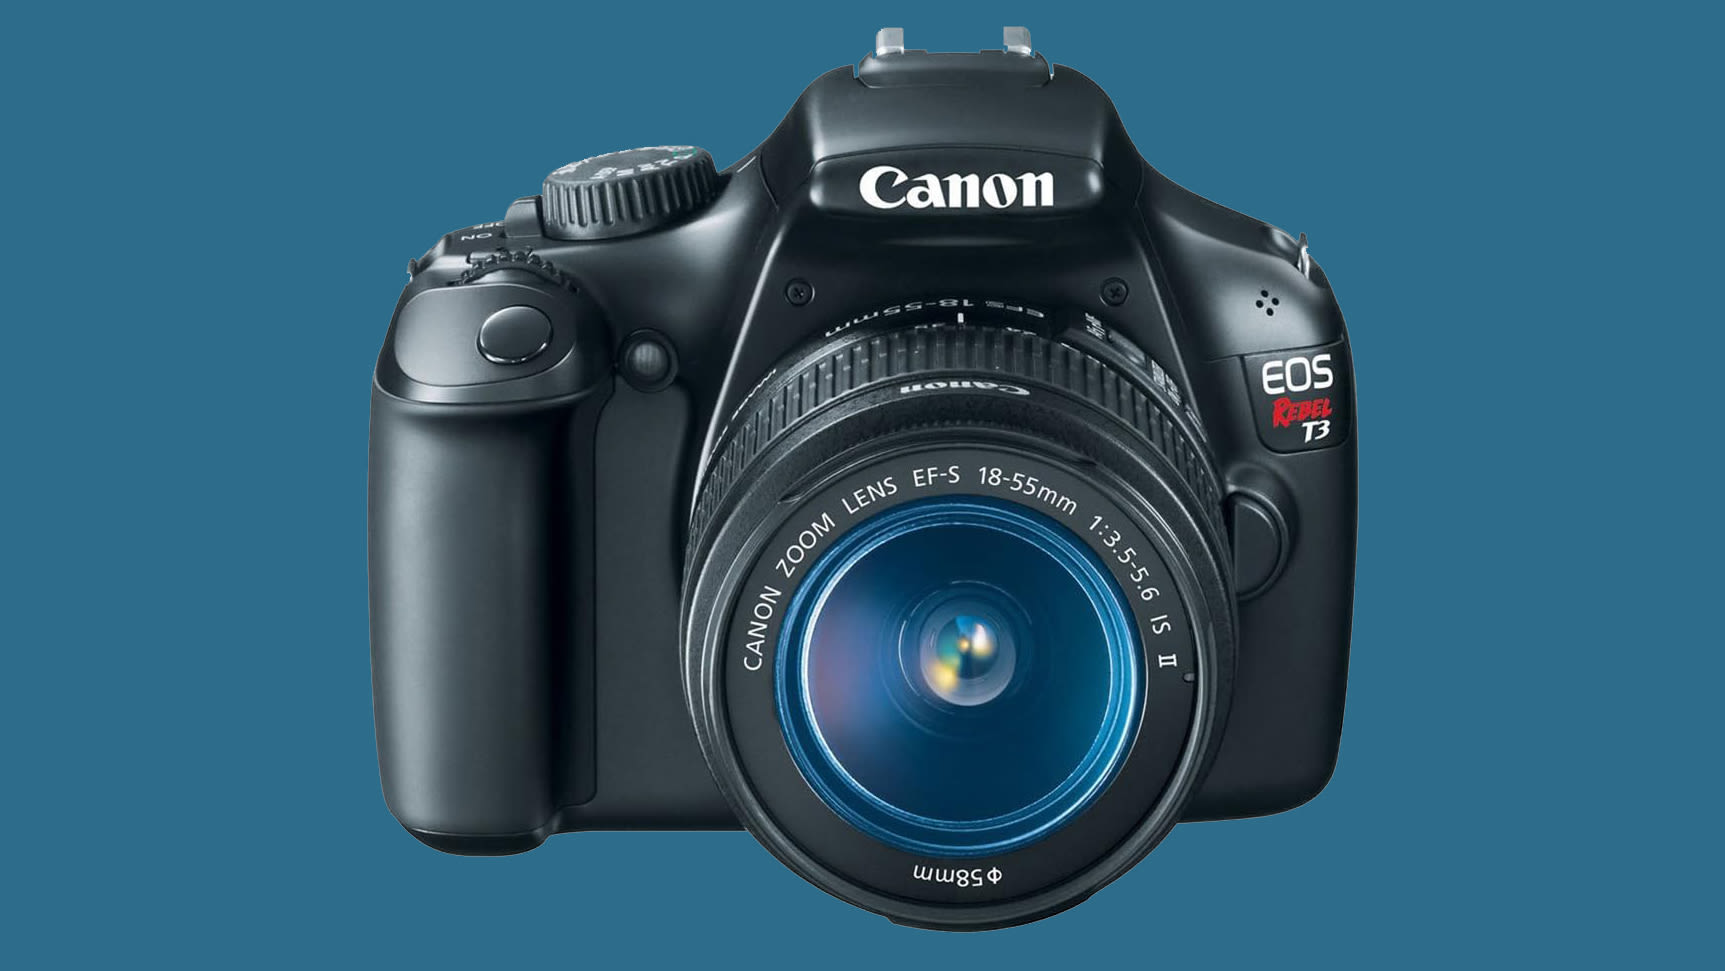 Canon EOS Rebel T3: is this super cheap DSLR still worth a shot?